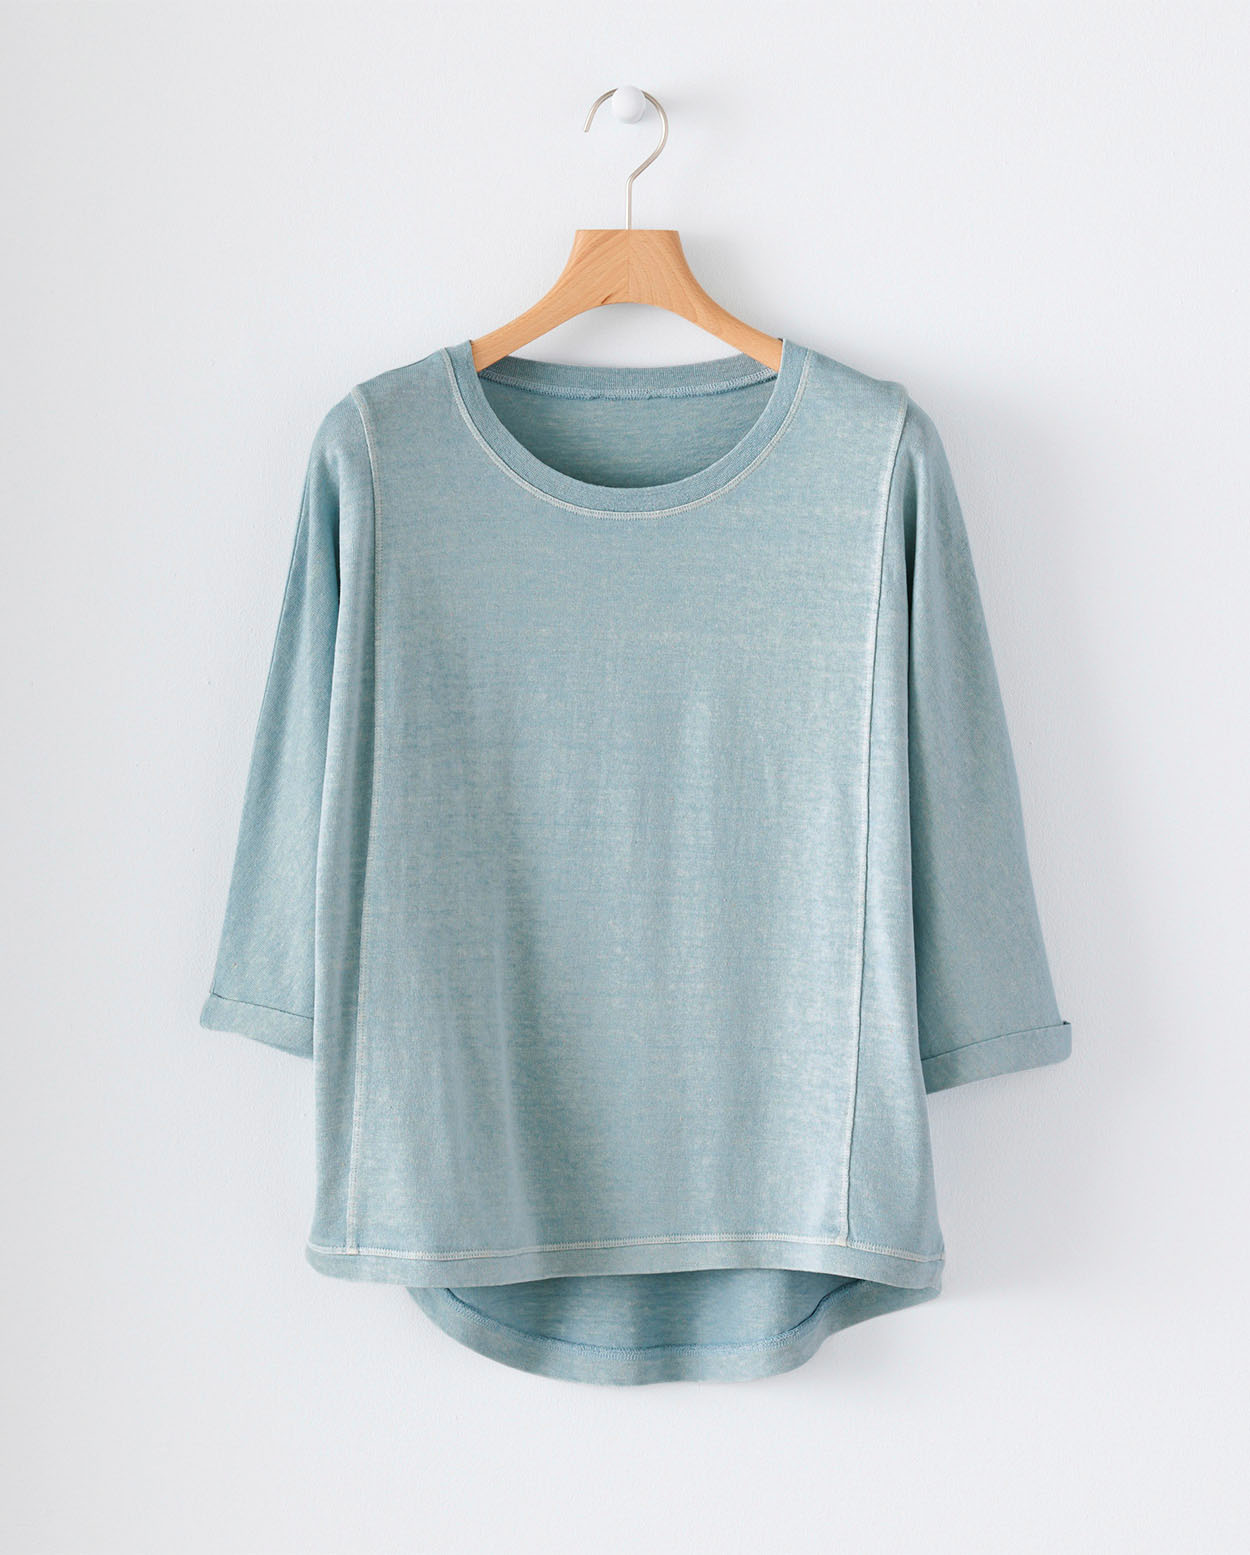 Poetry - Panelled hemp and cotton jersey top